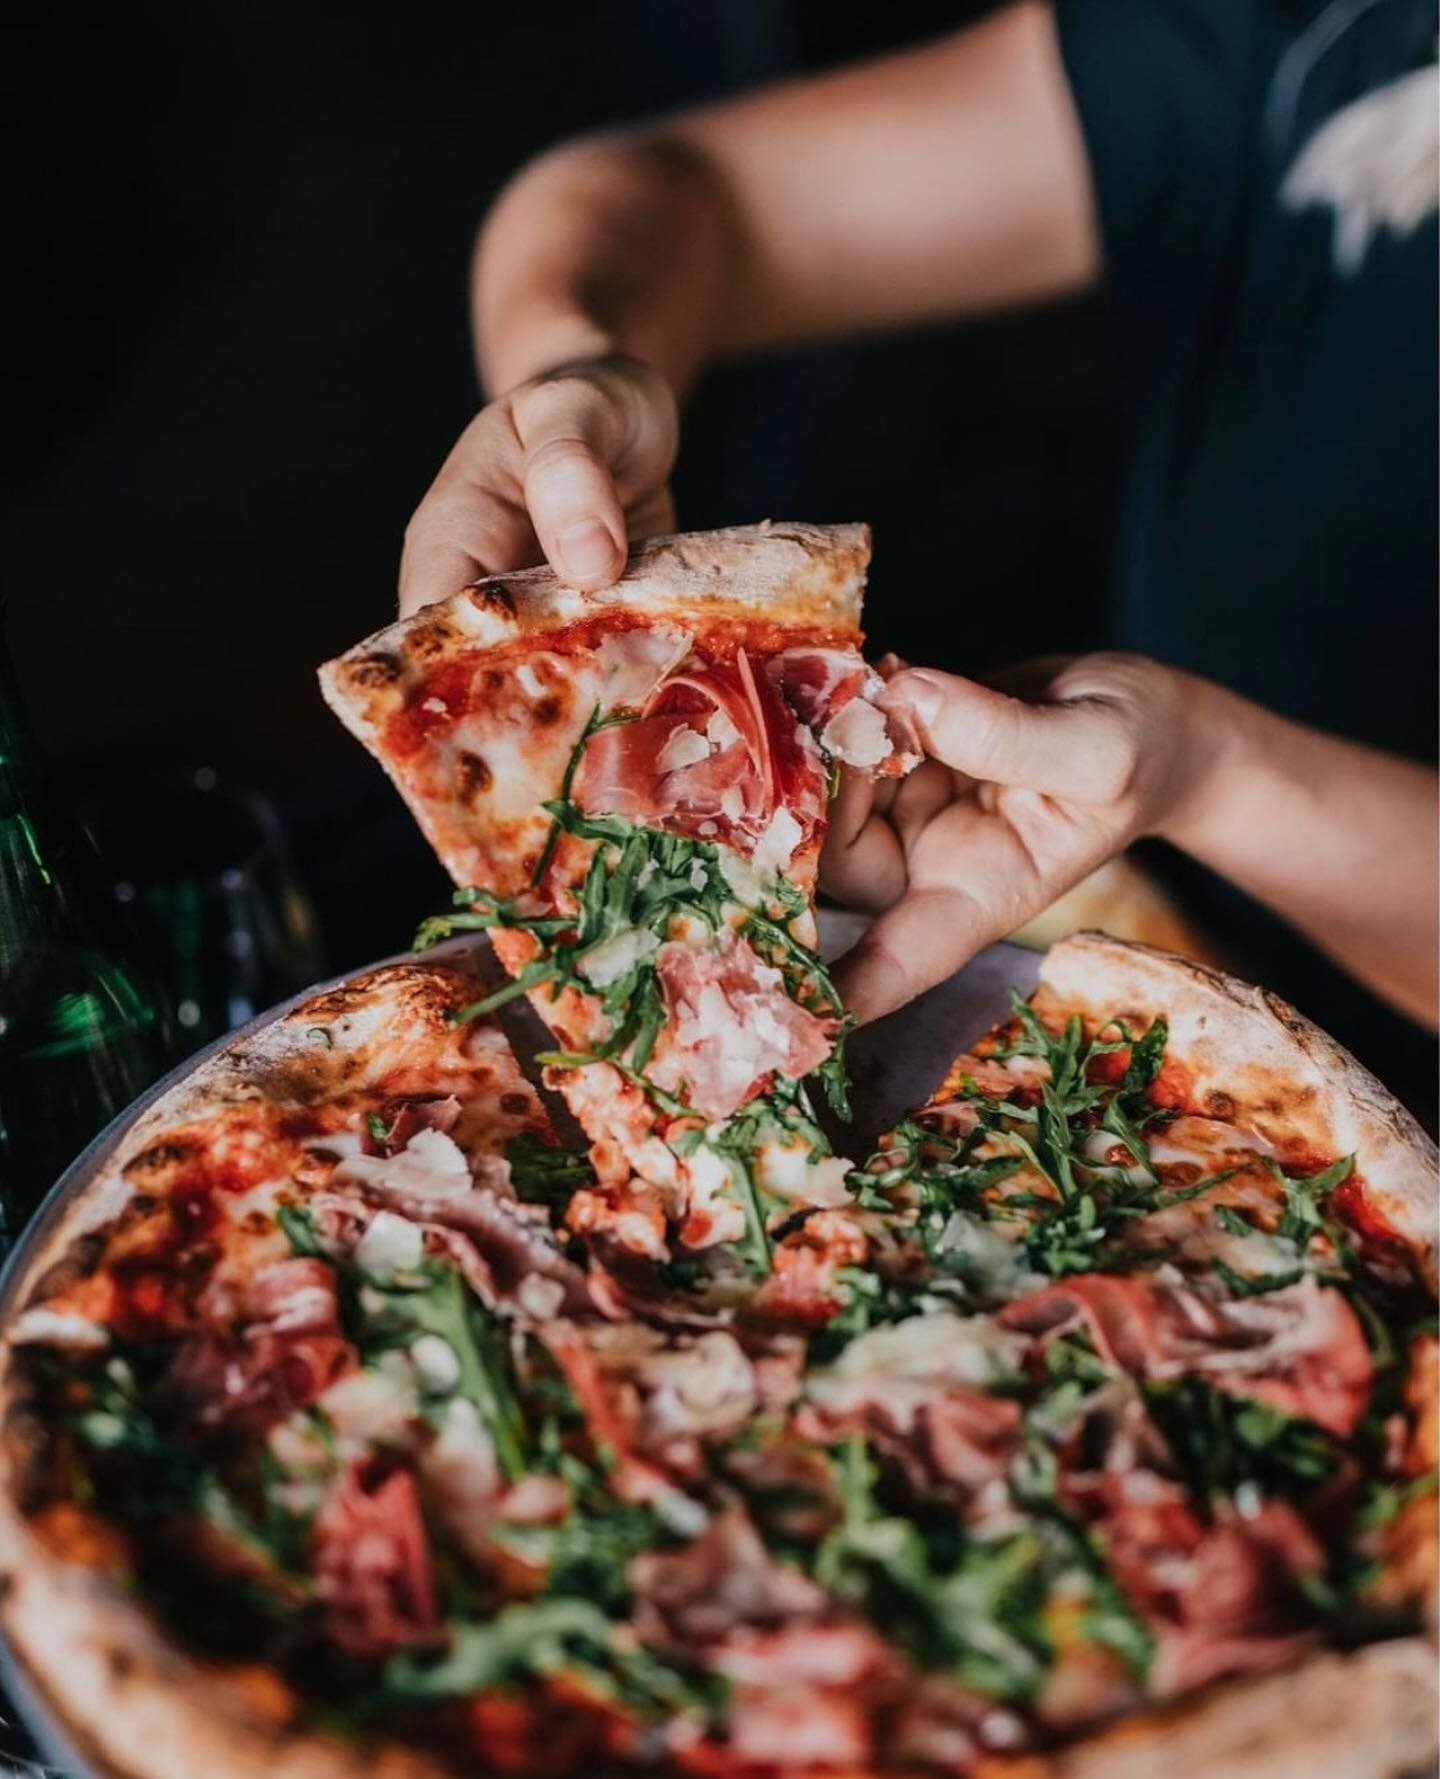 Did someone say 1/2 price pizza? Every Friday, Saturday and Sunday from 4:30-5:30pm! 🍕 
⠀⠀⠀⠀⠀⠀⠀⠀⠀
.
.
.
⠀⠀⠀⠀⠀⠀⠀⠀⠀
#parrystgarage #parrystreet #newcastle #newcastlensw #newcastleaus #food #beer #cocktails #pizza